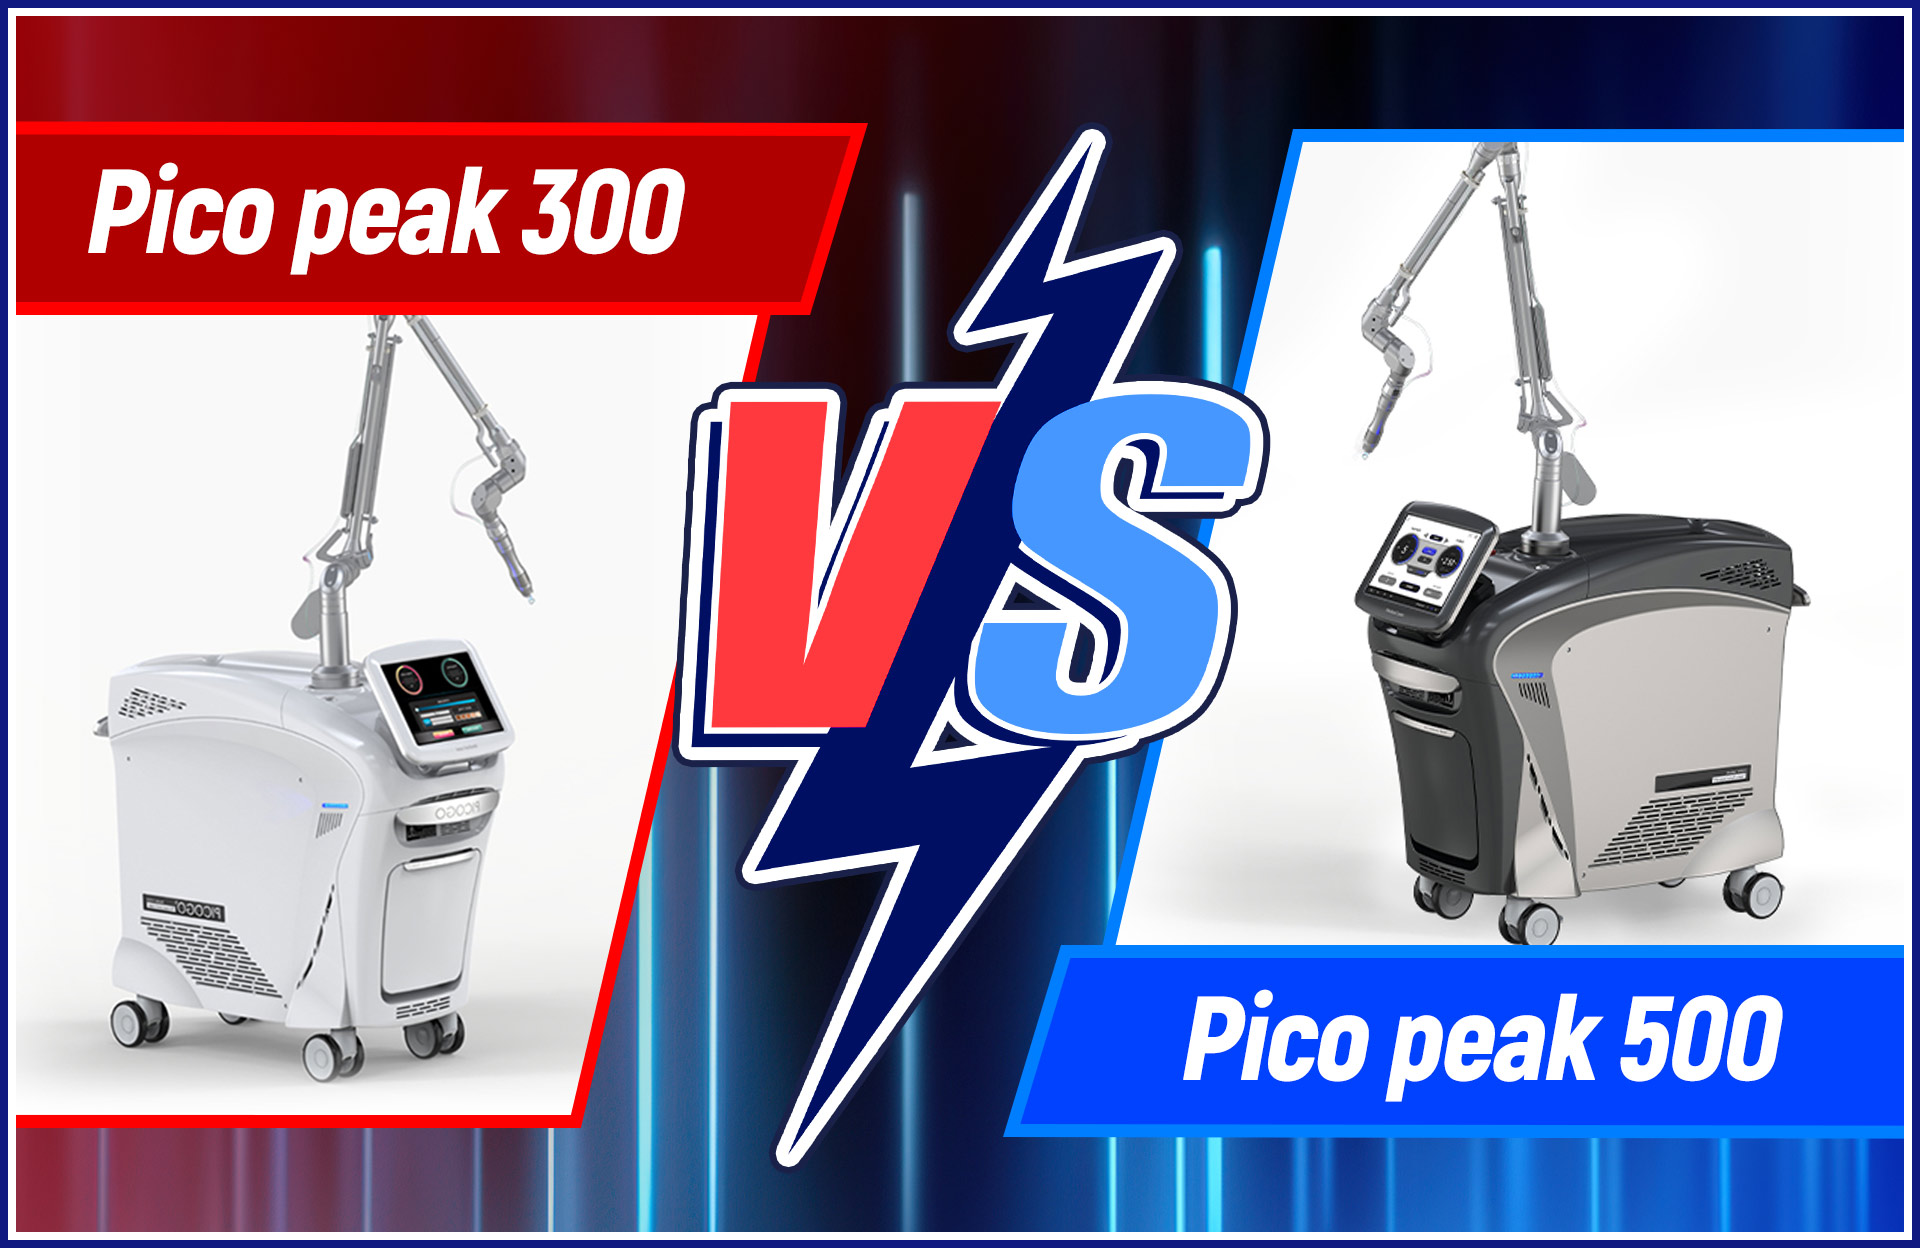 Understanding the Differences Between Picospeak 300 and 500 in One Article